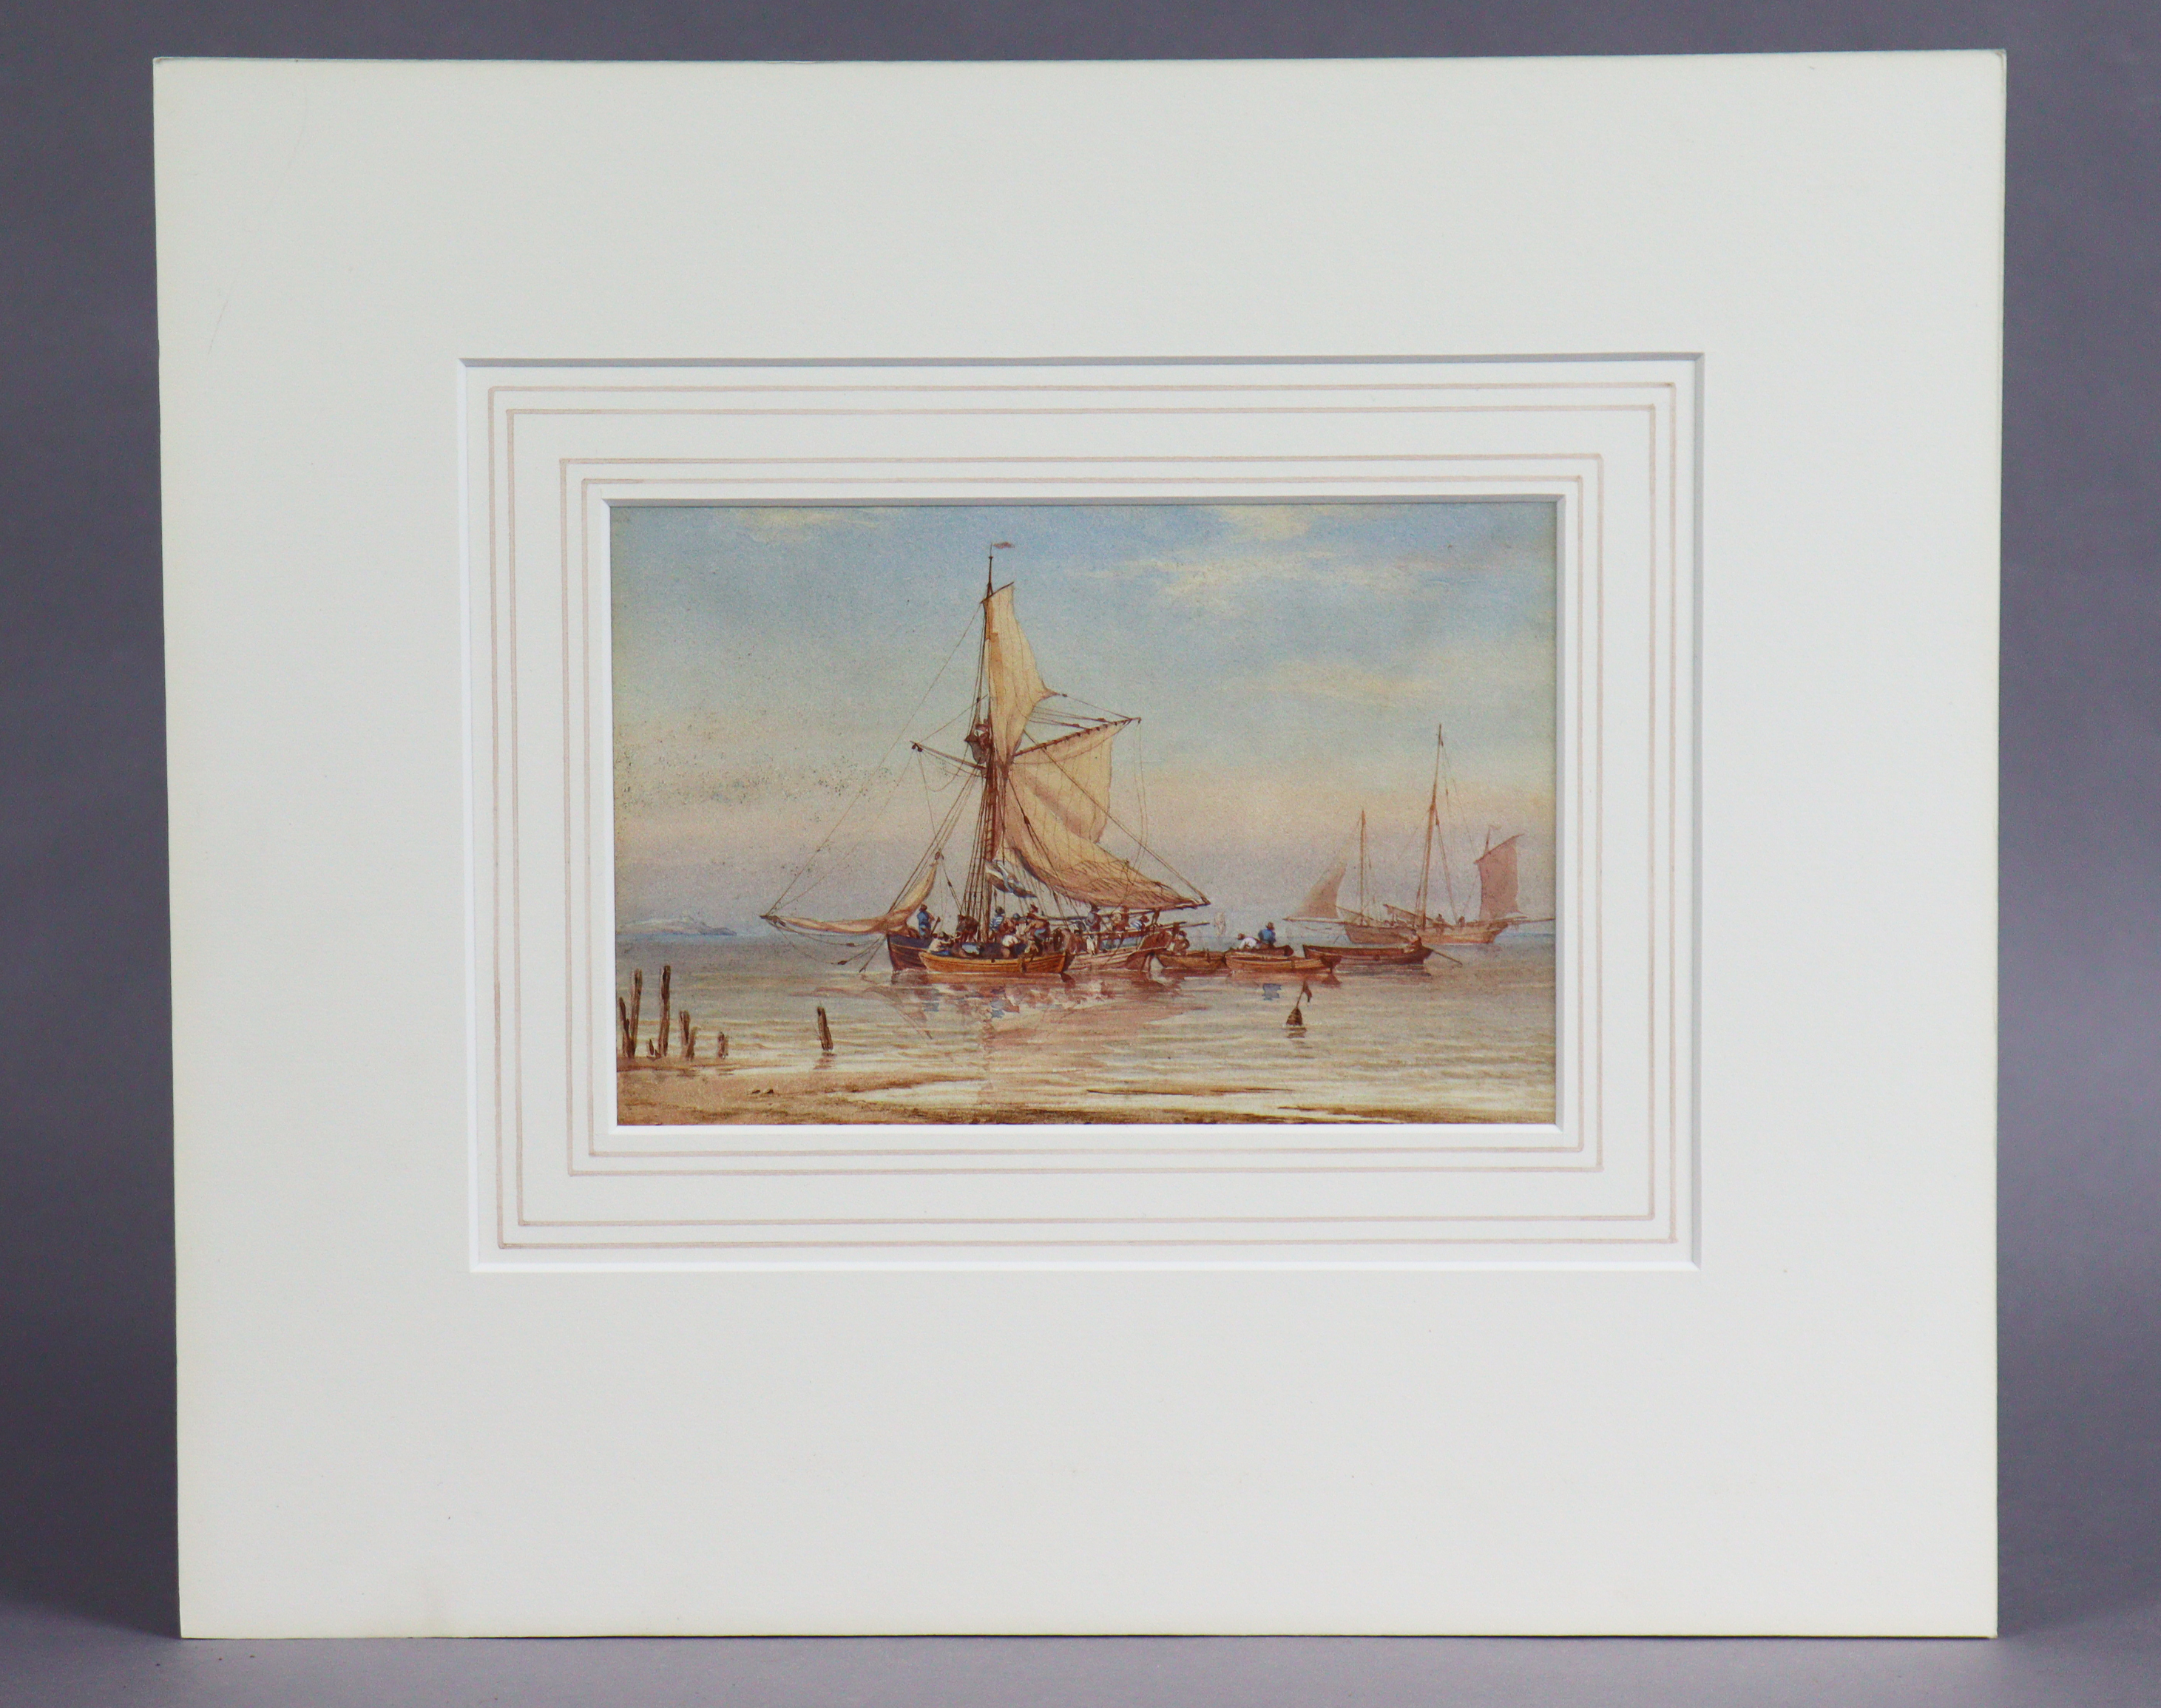 Attributed to WILLIAM JOY (1803-1867) and JOHN CANTILOE JOY (1806-1866). Fishing vessels off the - Image 3 of 6